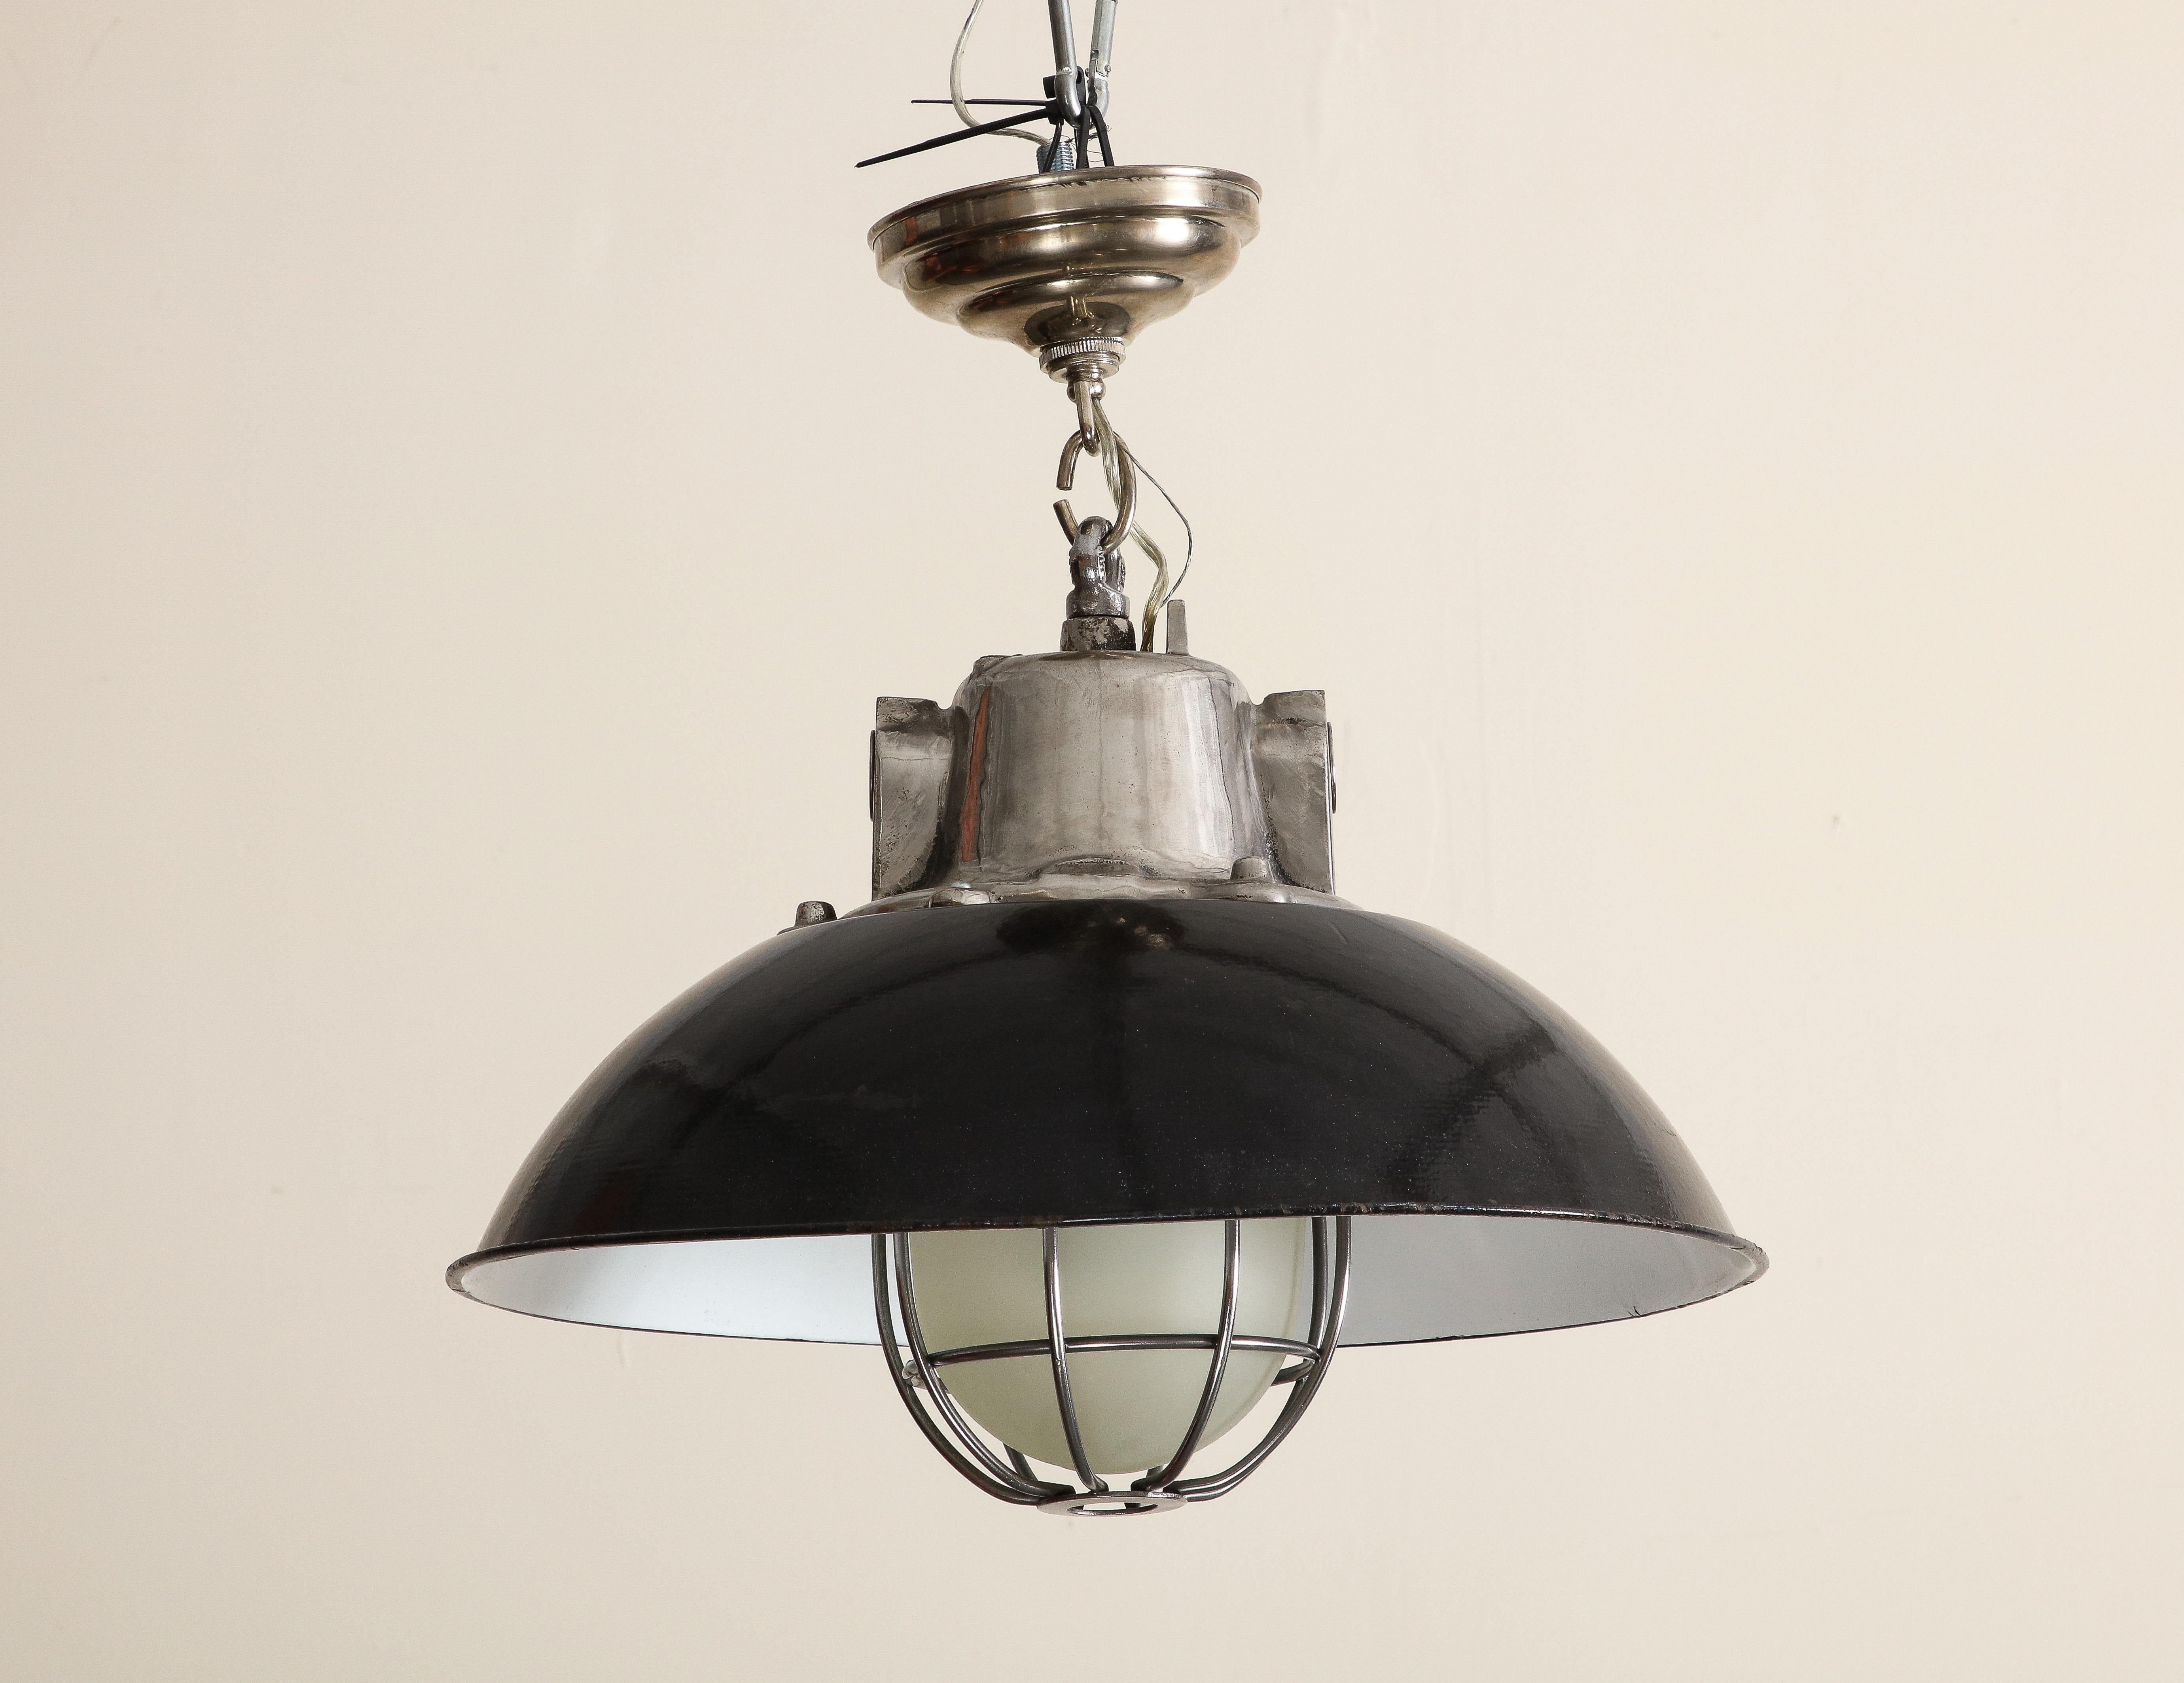 Pair of Midcentury Industrial Style Cage Pendant Lights with Black Enamel Shade For Sale 1